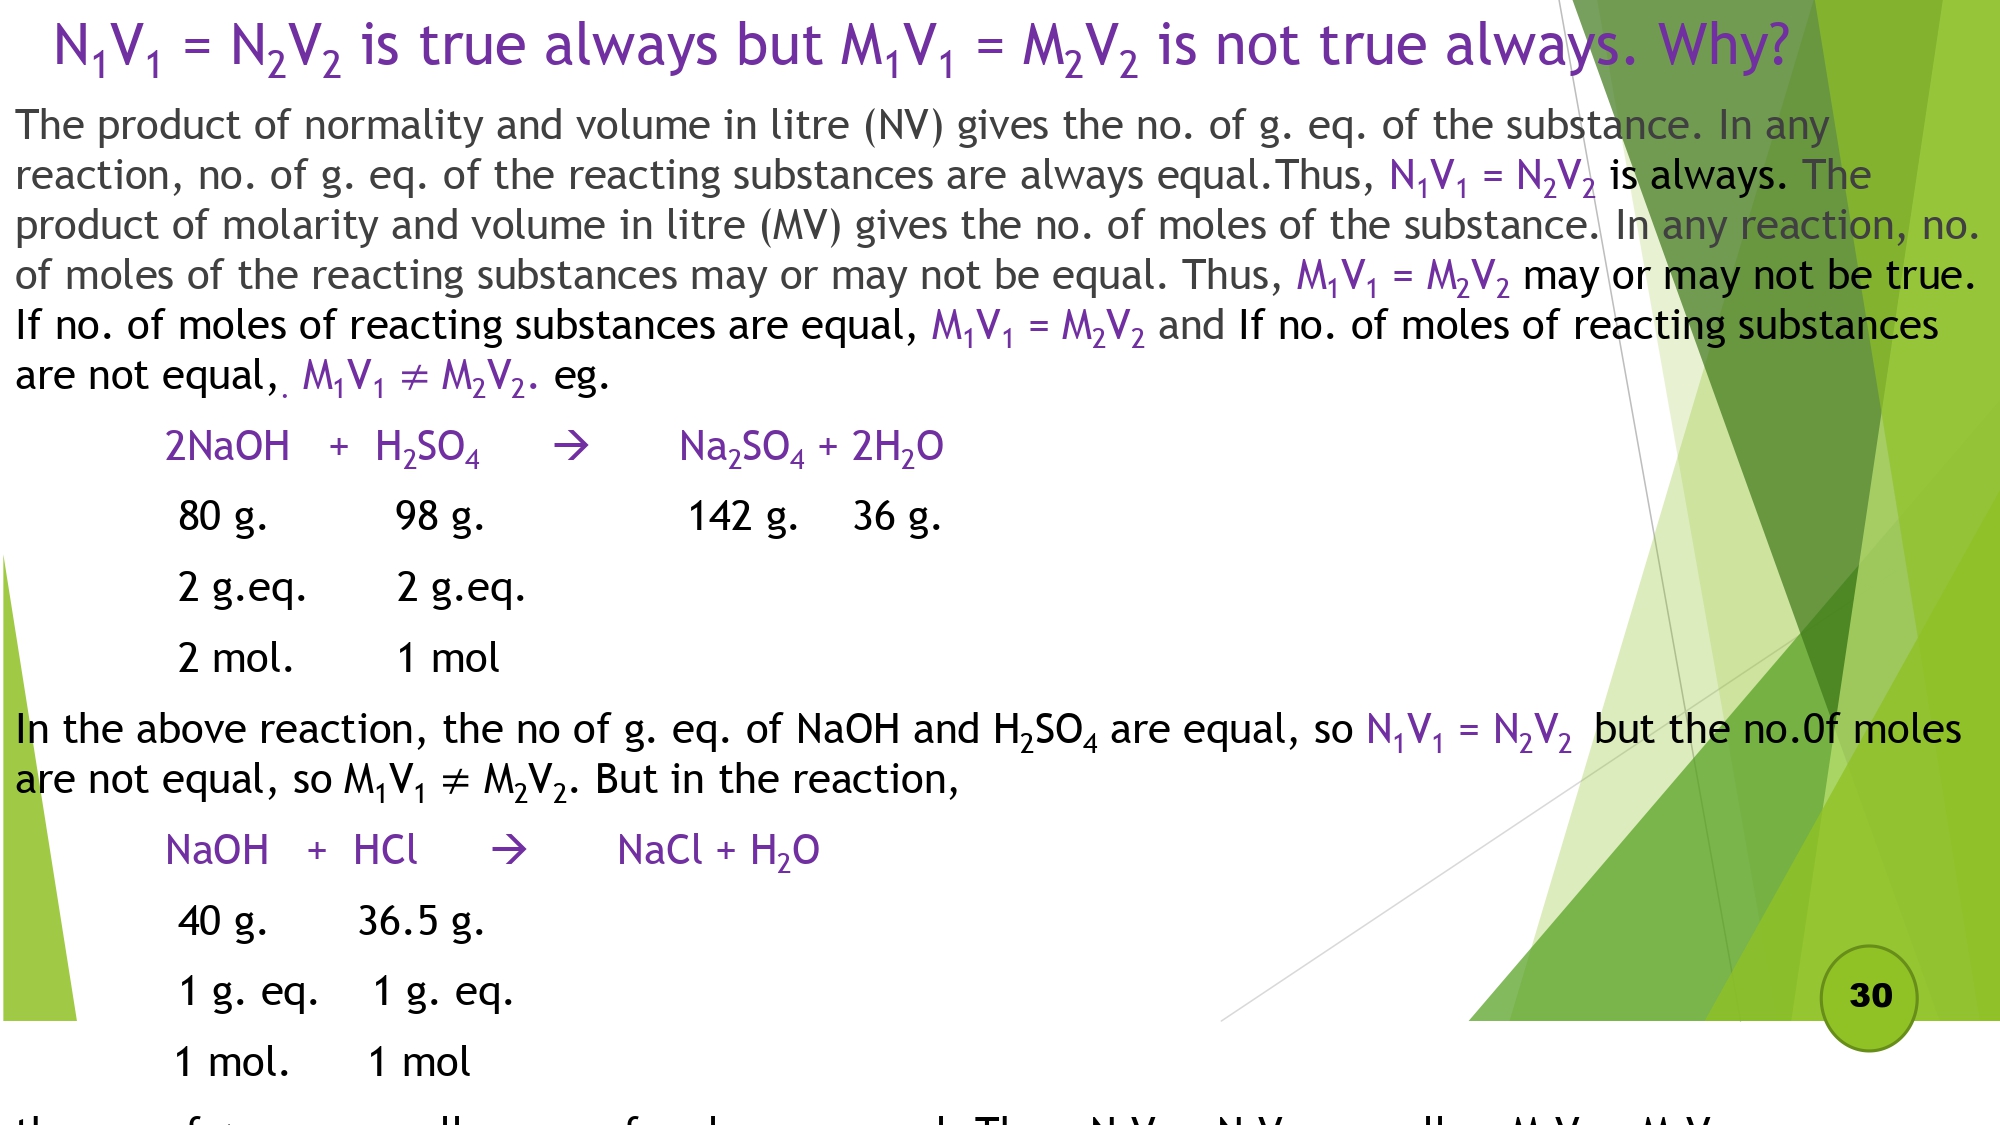 N1V1 = N2V2 is true always but M1V1 = M2V2 is not true always. Why?